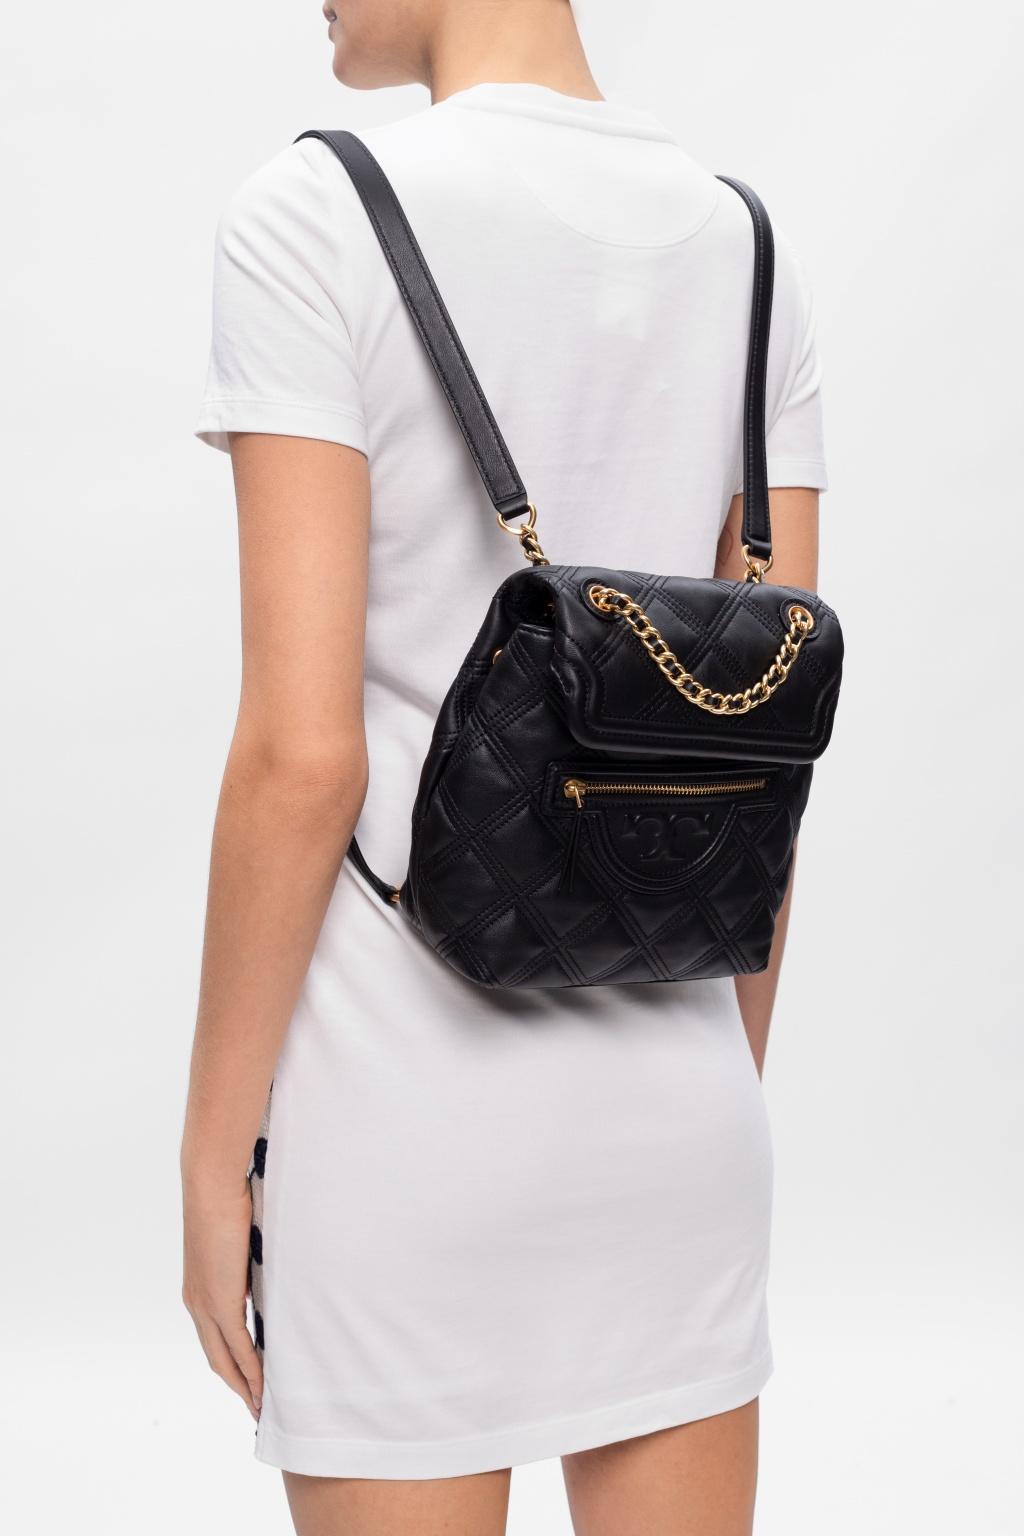 Tory Burch Fleming Backpack Offers Online, Save 66% | jlcatj.gob.mx